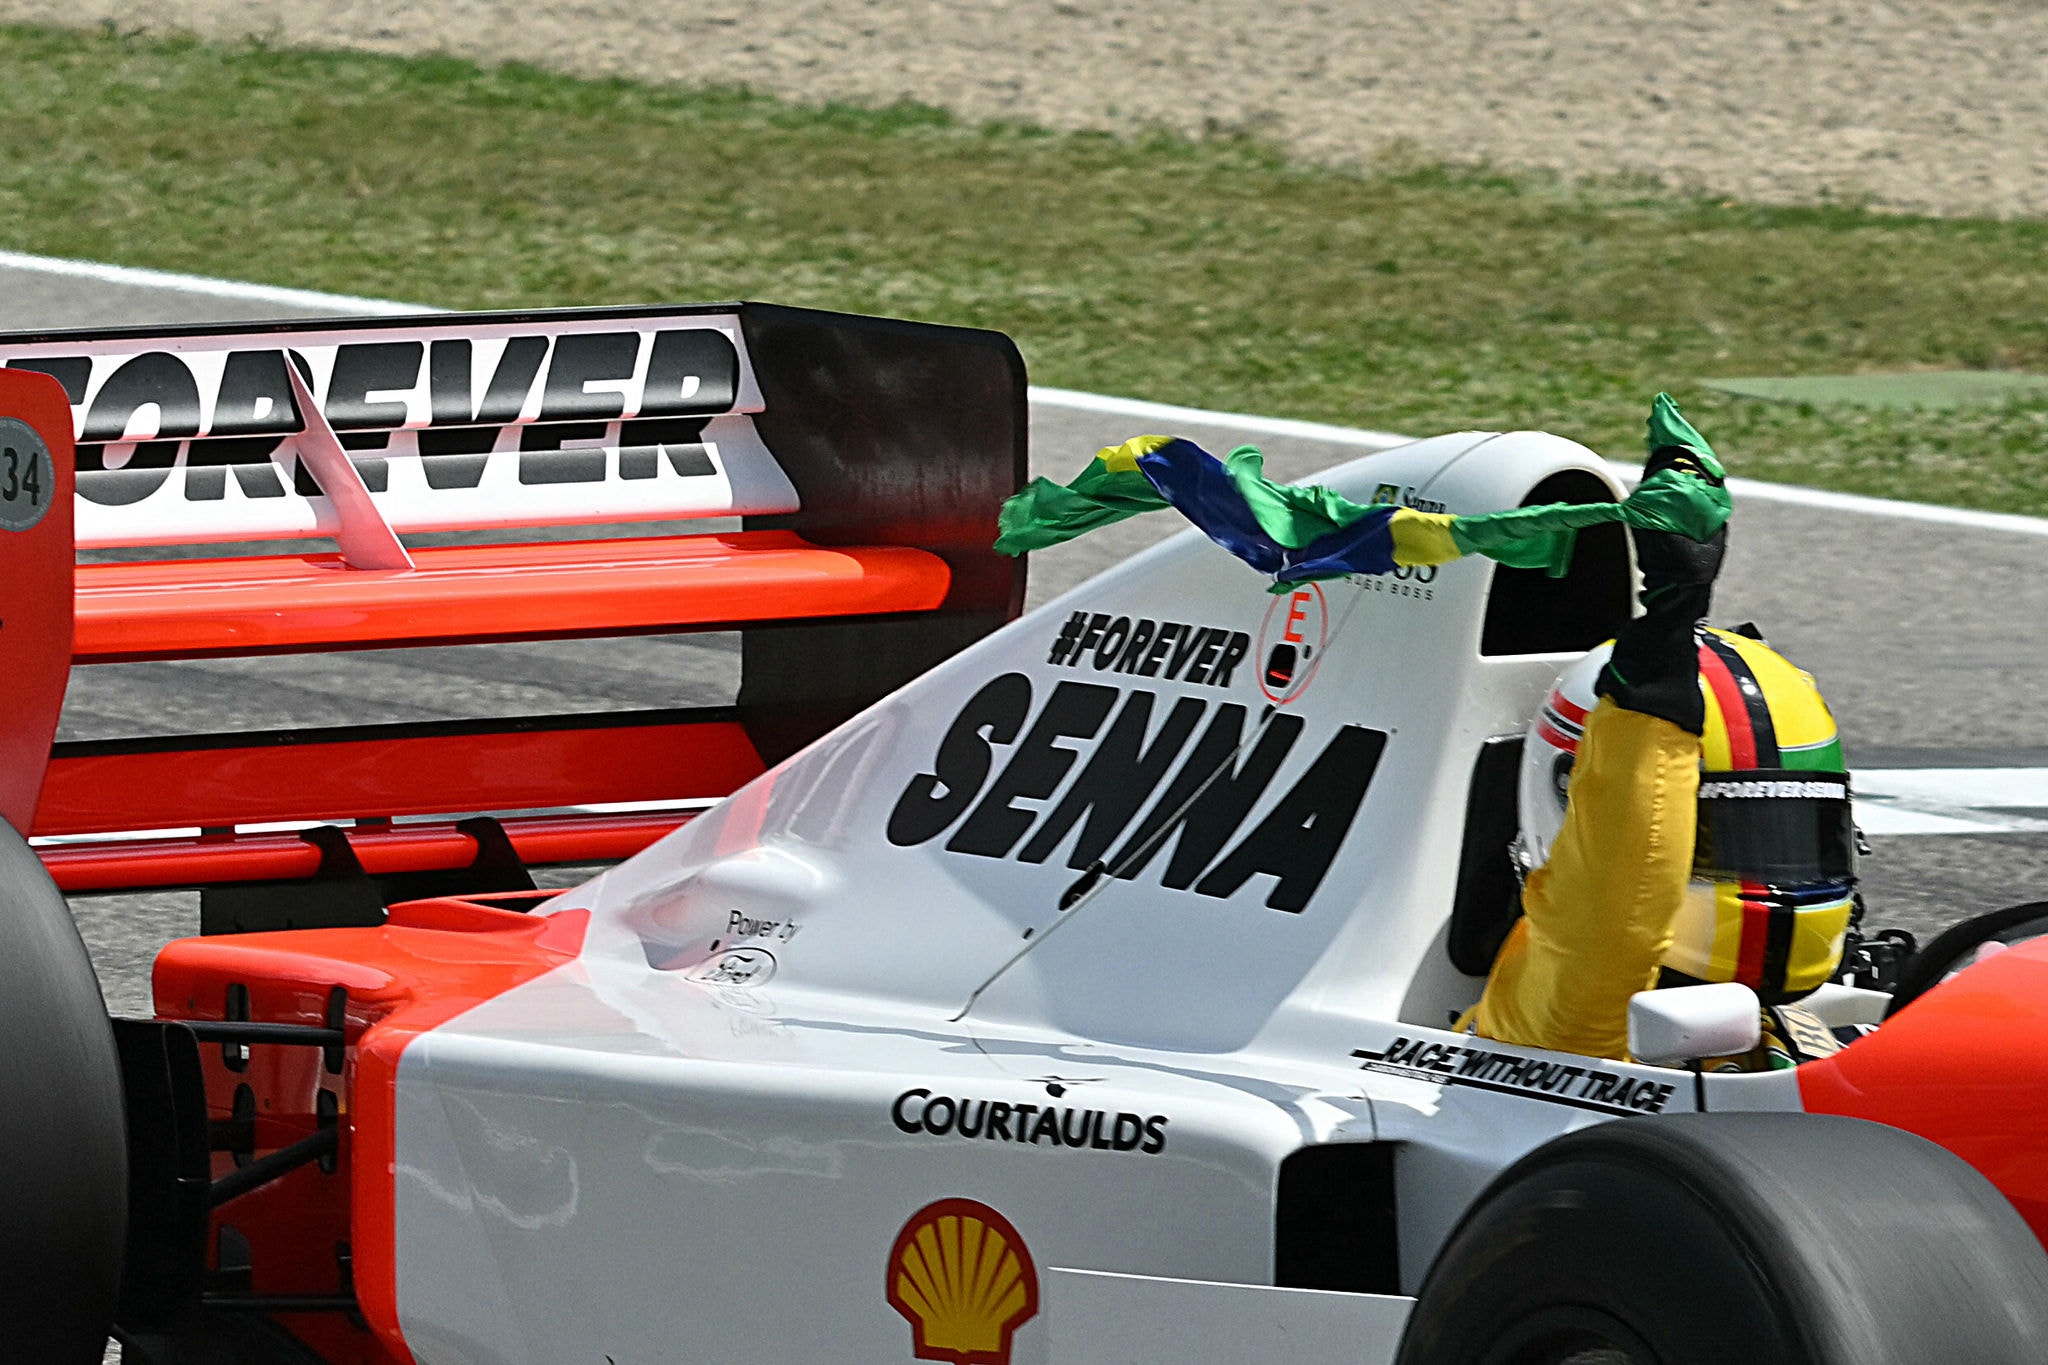 German former Formula One champion Sebastian Vettel holds a Brazilian flag as he drives the historic McLaren car of late Brazilian driver Ayrton Senna, to mark 30th anniversary of his death, during the drivers' parade prior to the Emilia Romagna Formula One Grand Prix at the Autodromo Enzo e Dino Ferrari race track in Imola on May 19, 2024. The 34-year-old Brazilian Formula One champion Ayrton Senna was leading at Imola on May 1, 1994, when he went off the track at the Tamburello curve and smashed into a concrete wall. (Photo by ANDREJ ISAKOVIC / AFP)